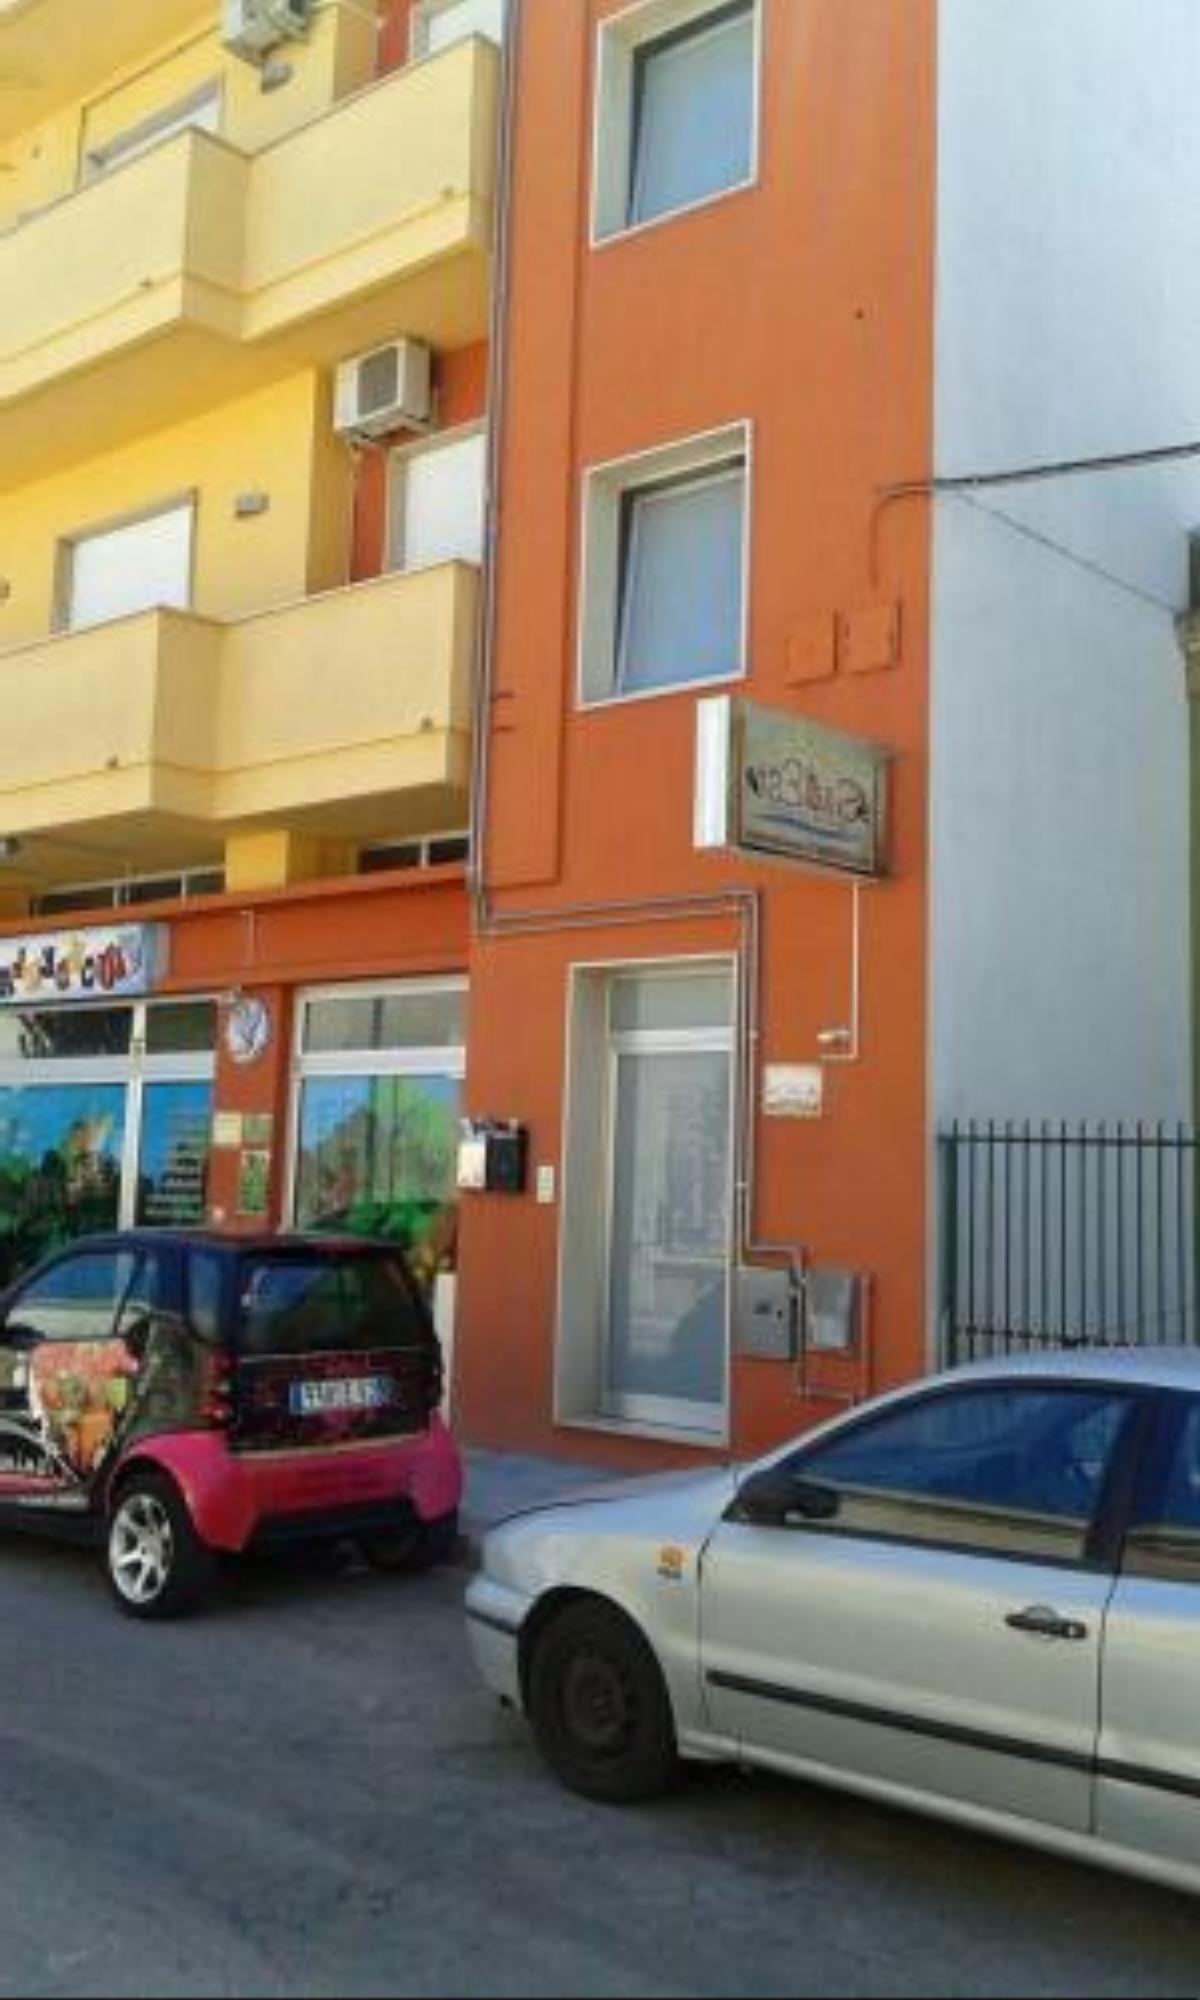 Sud Est Guest House Hotel Carmiano Italy